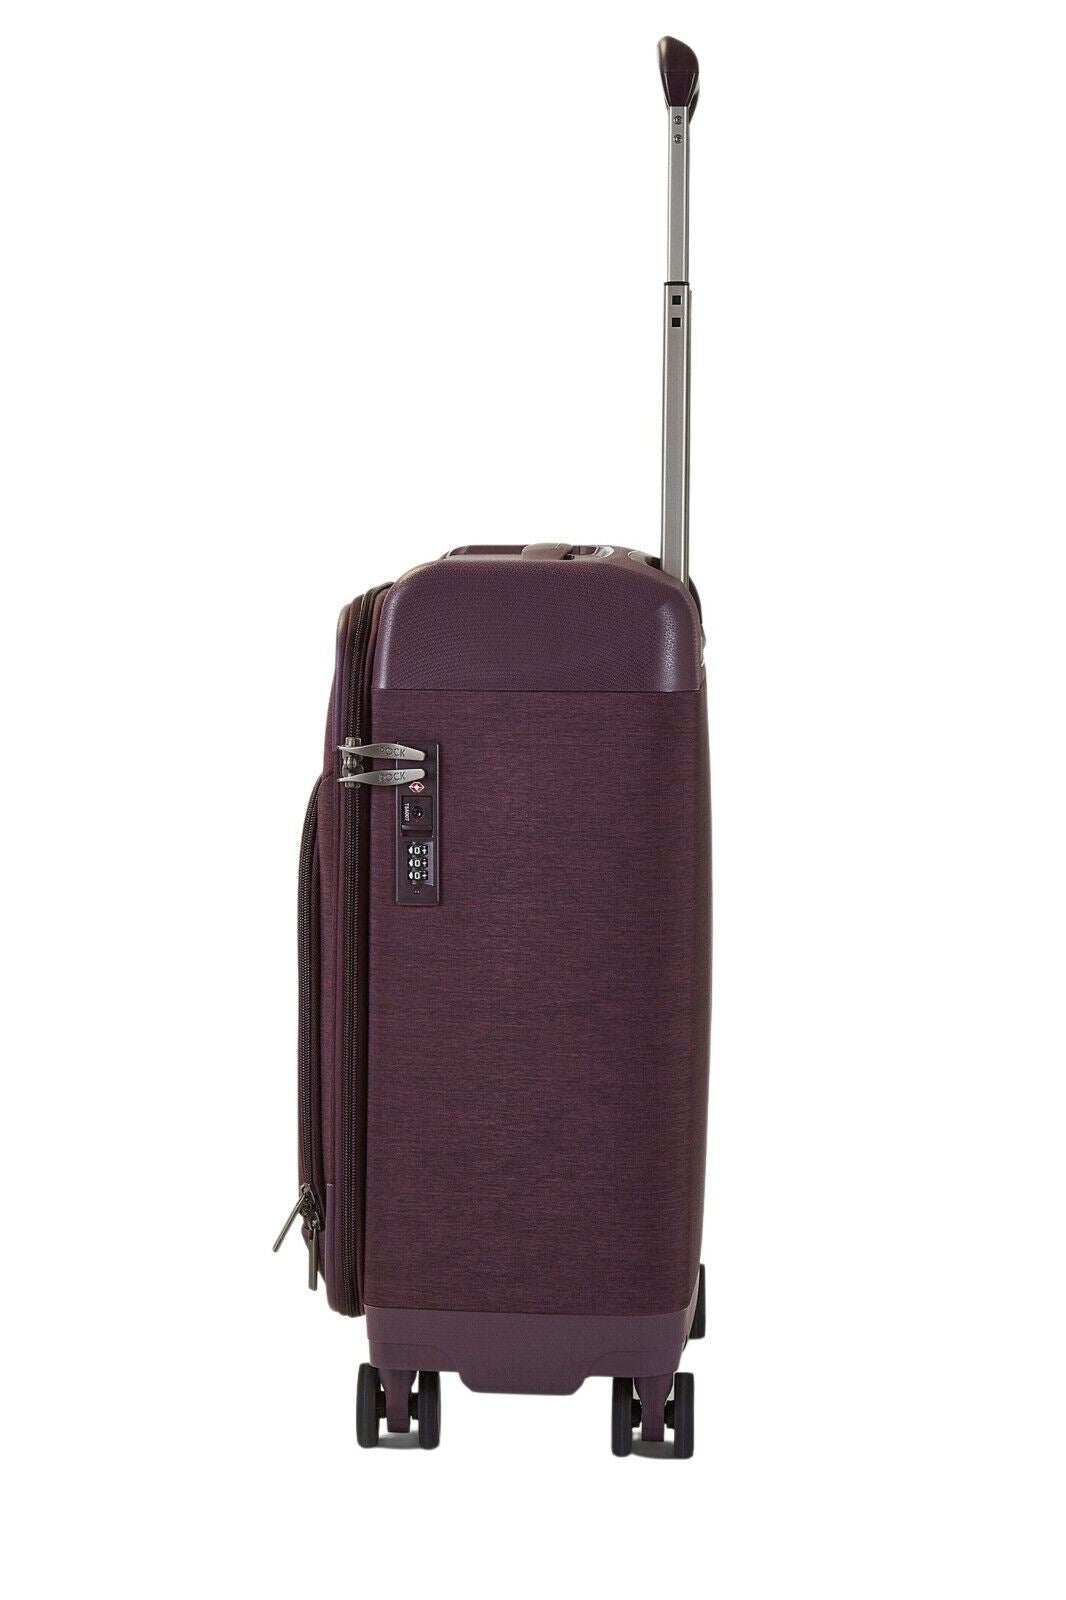 Lightweight Purple Soft Suitcases 4 Wheel Luggage Travel Trolley Cases Cabin Bags